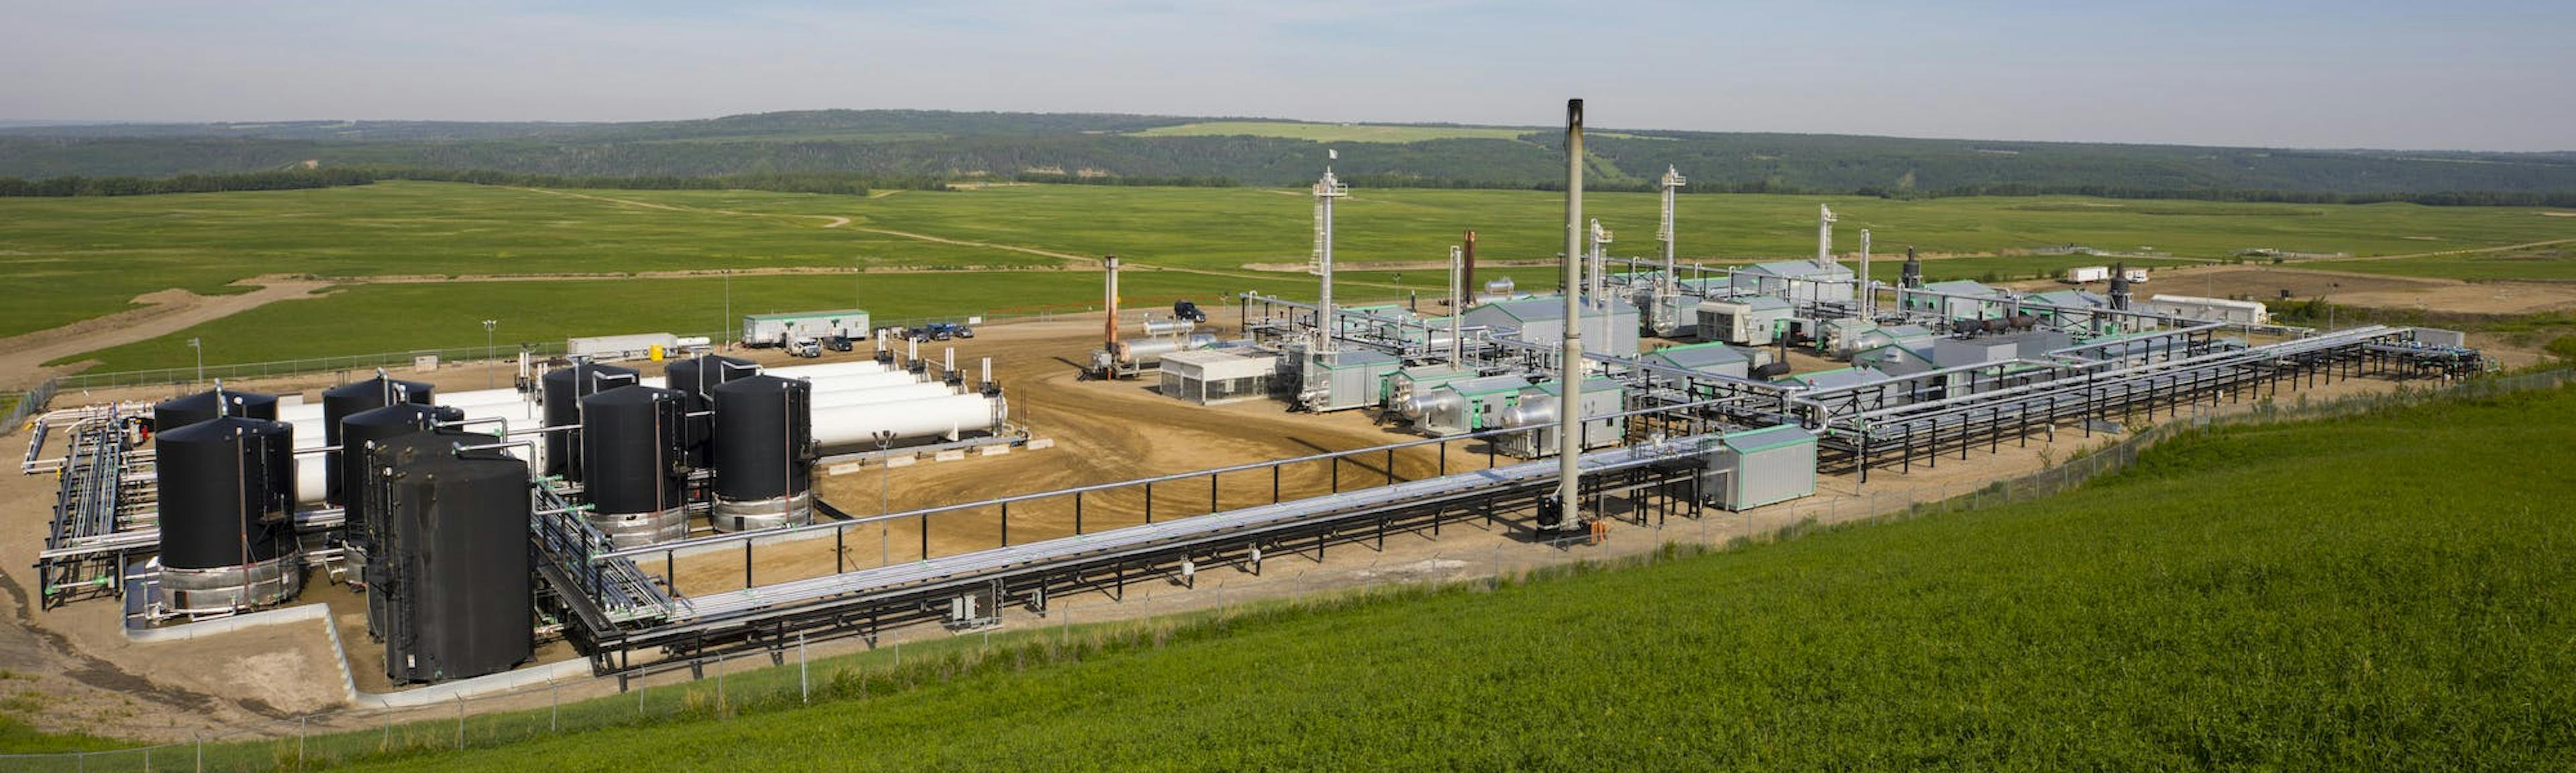 A wide view of a gas plant in a green field.